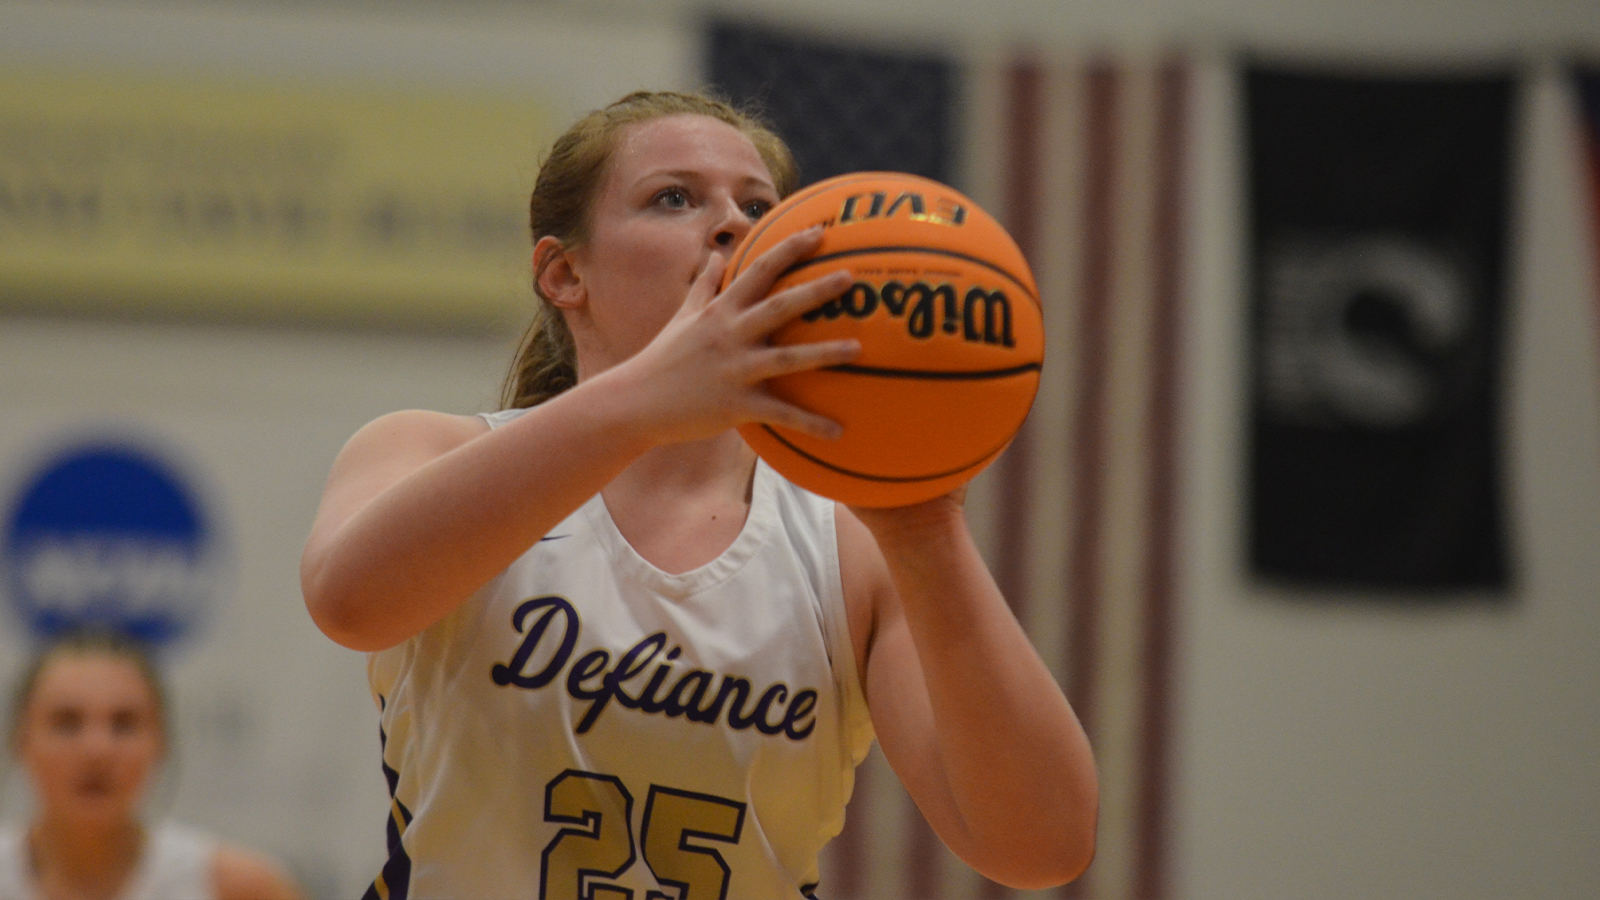 WBB Preview: Defiance aims to beat winter storm and MSJ on Tuesday